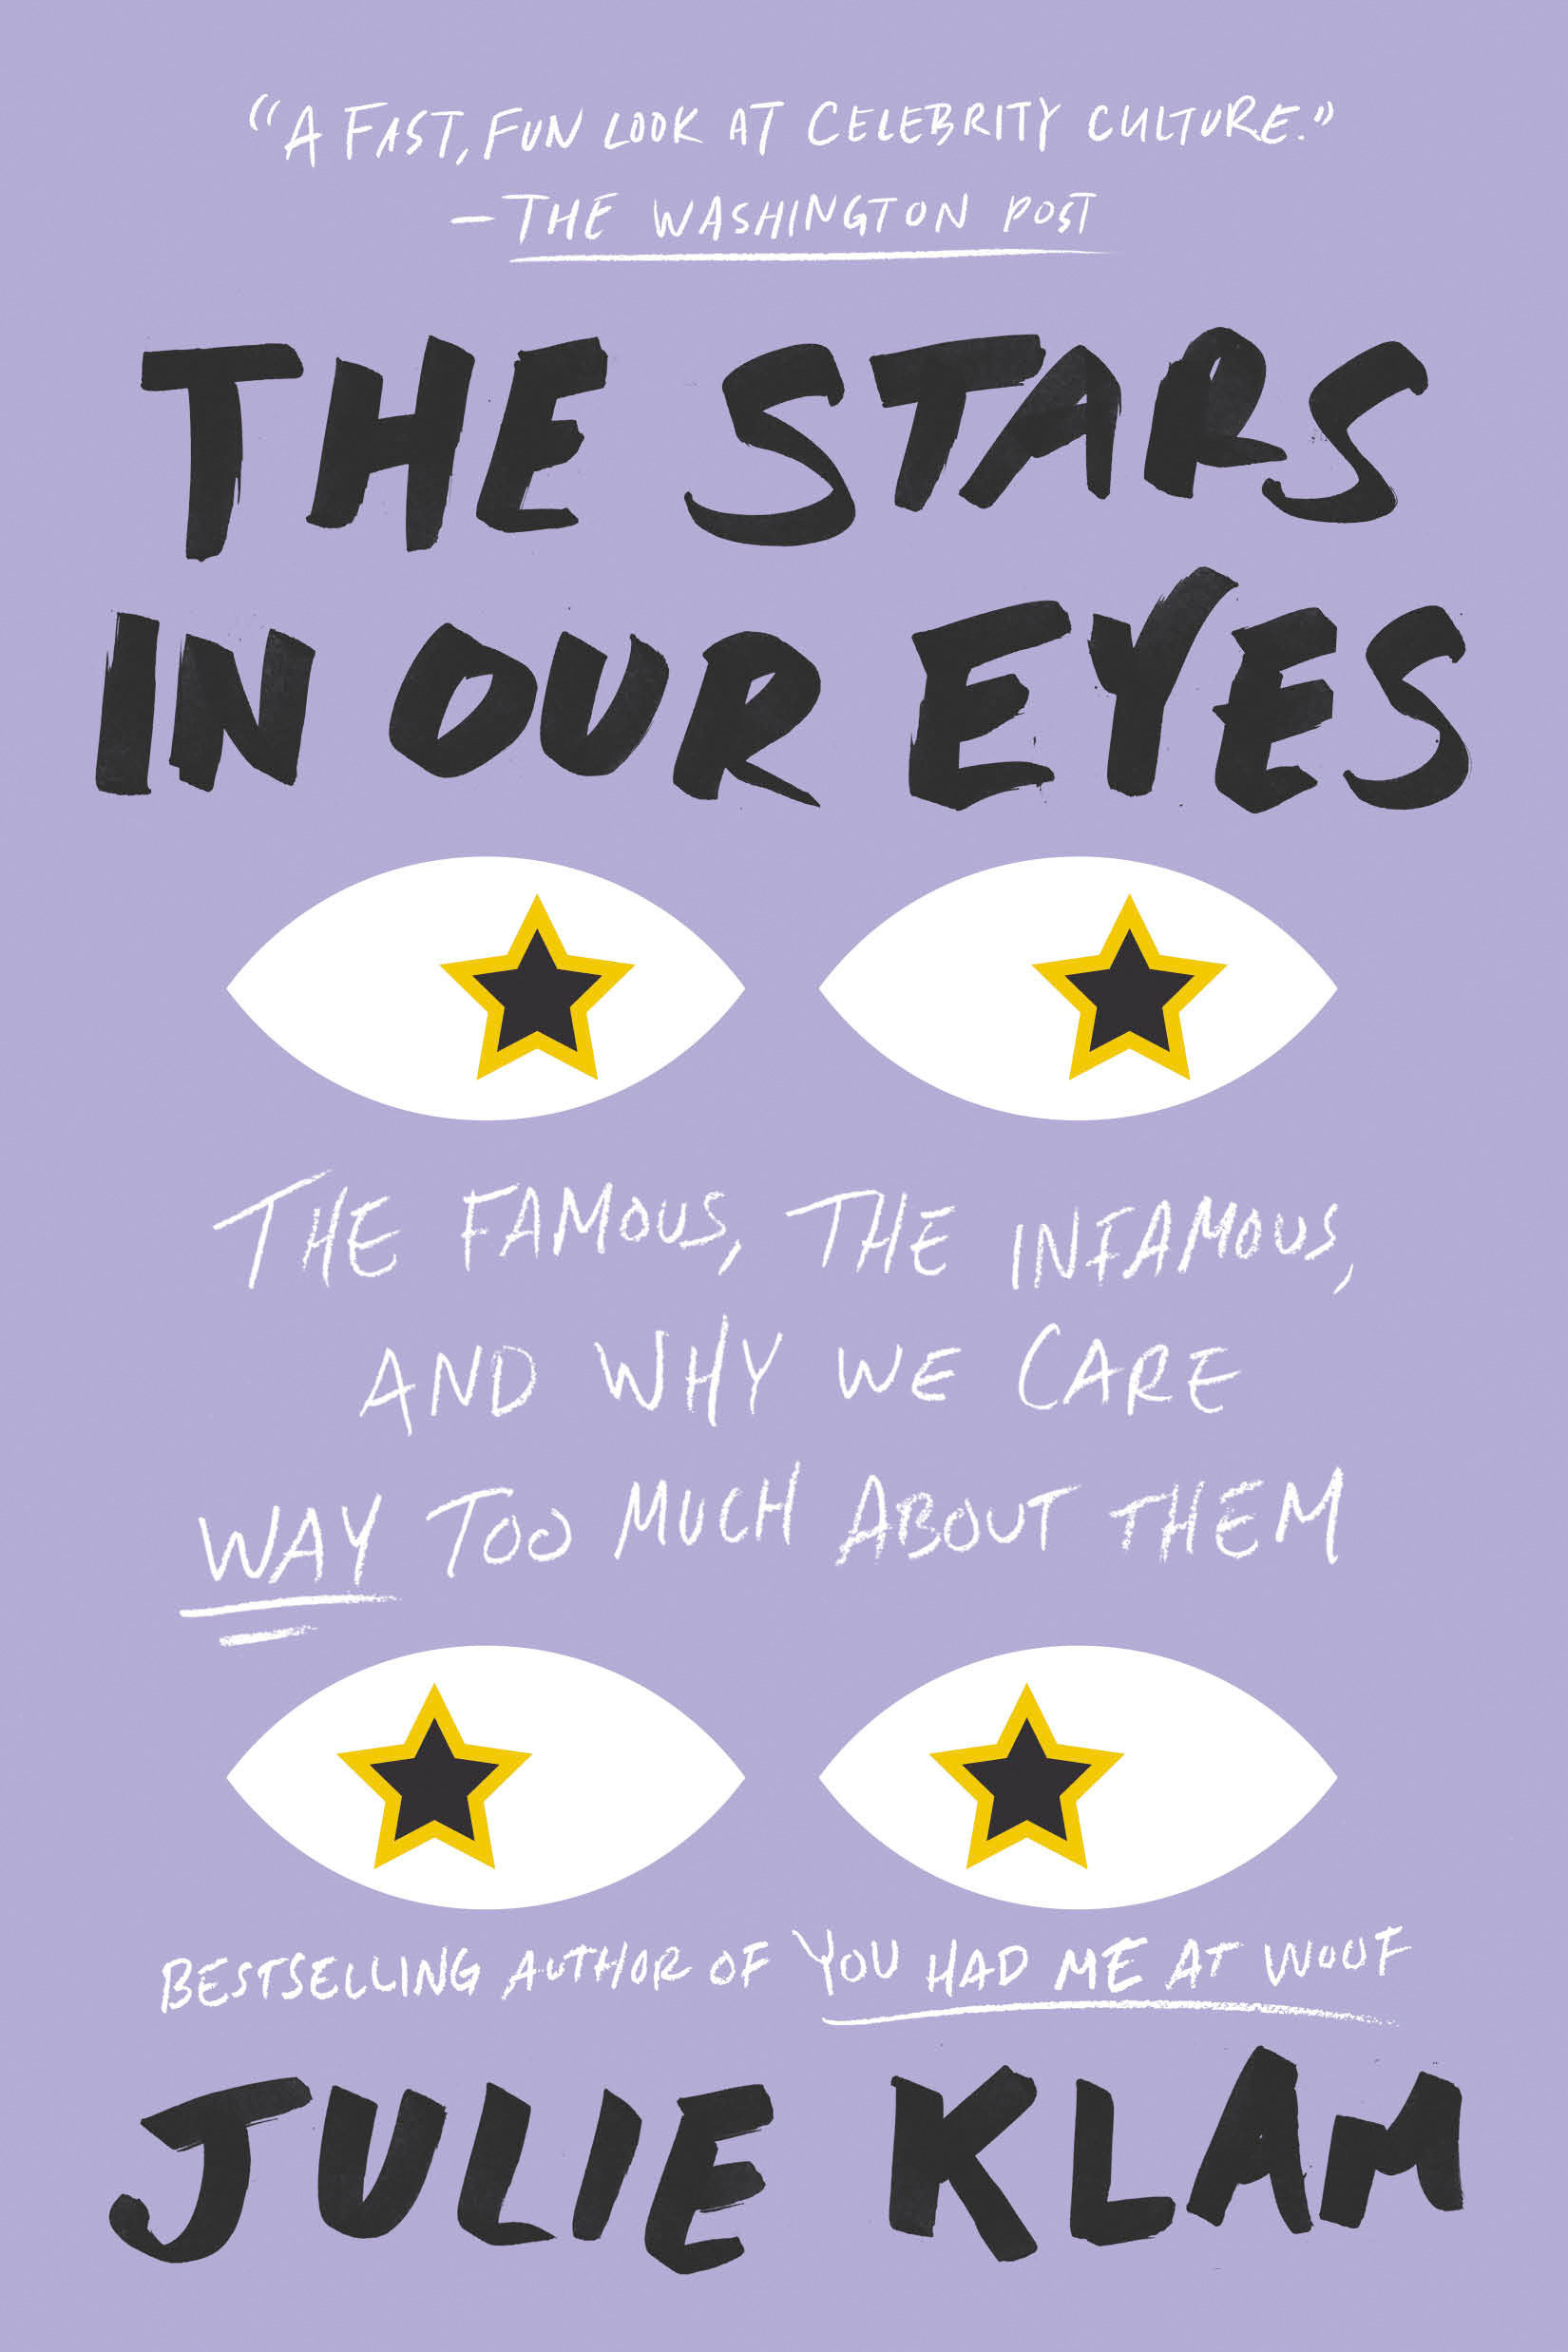 The stars in our eyes the famous, the infamous, and why we care way too much about them cover image